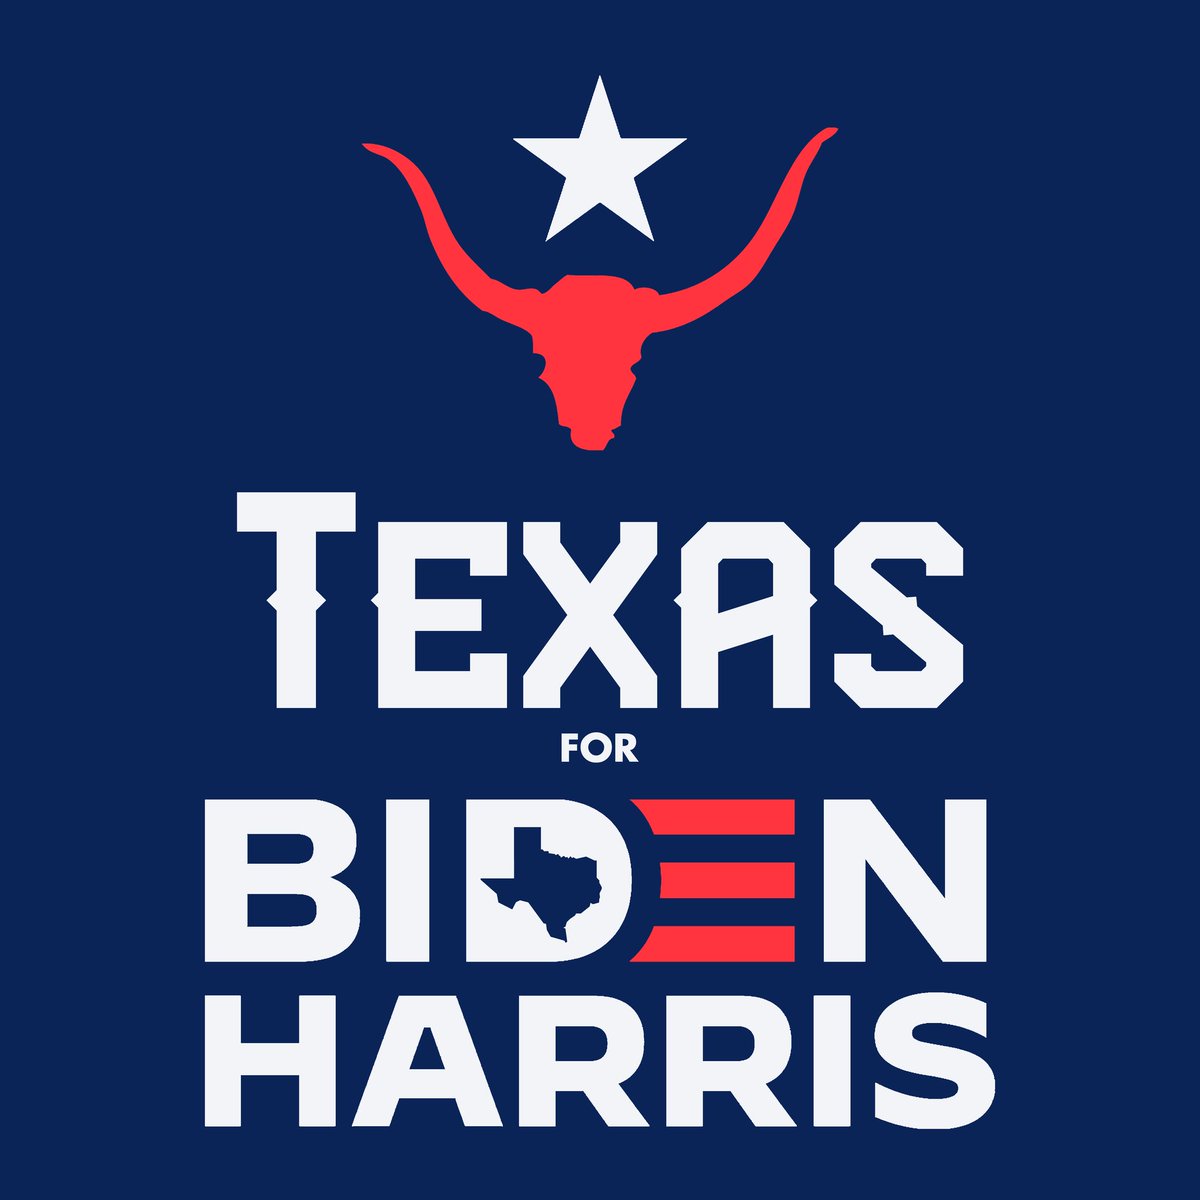 ICYMI my husband  @viva_verde is incredibly talented and made these beautiful state coalition graphics for  #BidenHarris supporters. More otw and he takes requests for priority! RT your state if you're  #RidinWithBidenHarris 7/8  #SouthDakota  #Tennessee  #Texas  #Utah